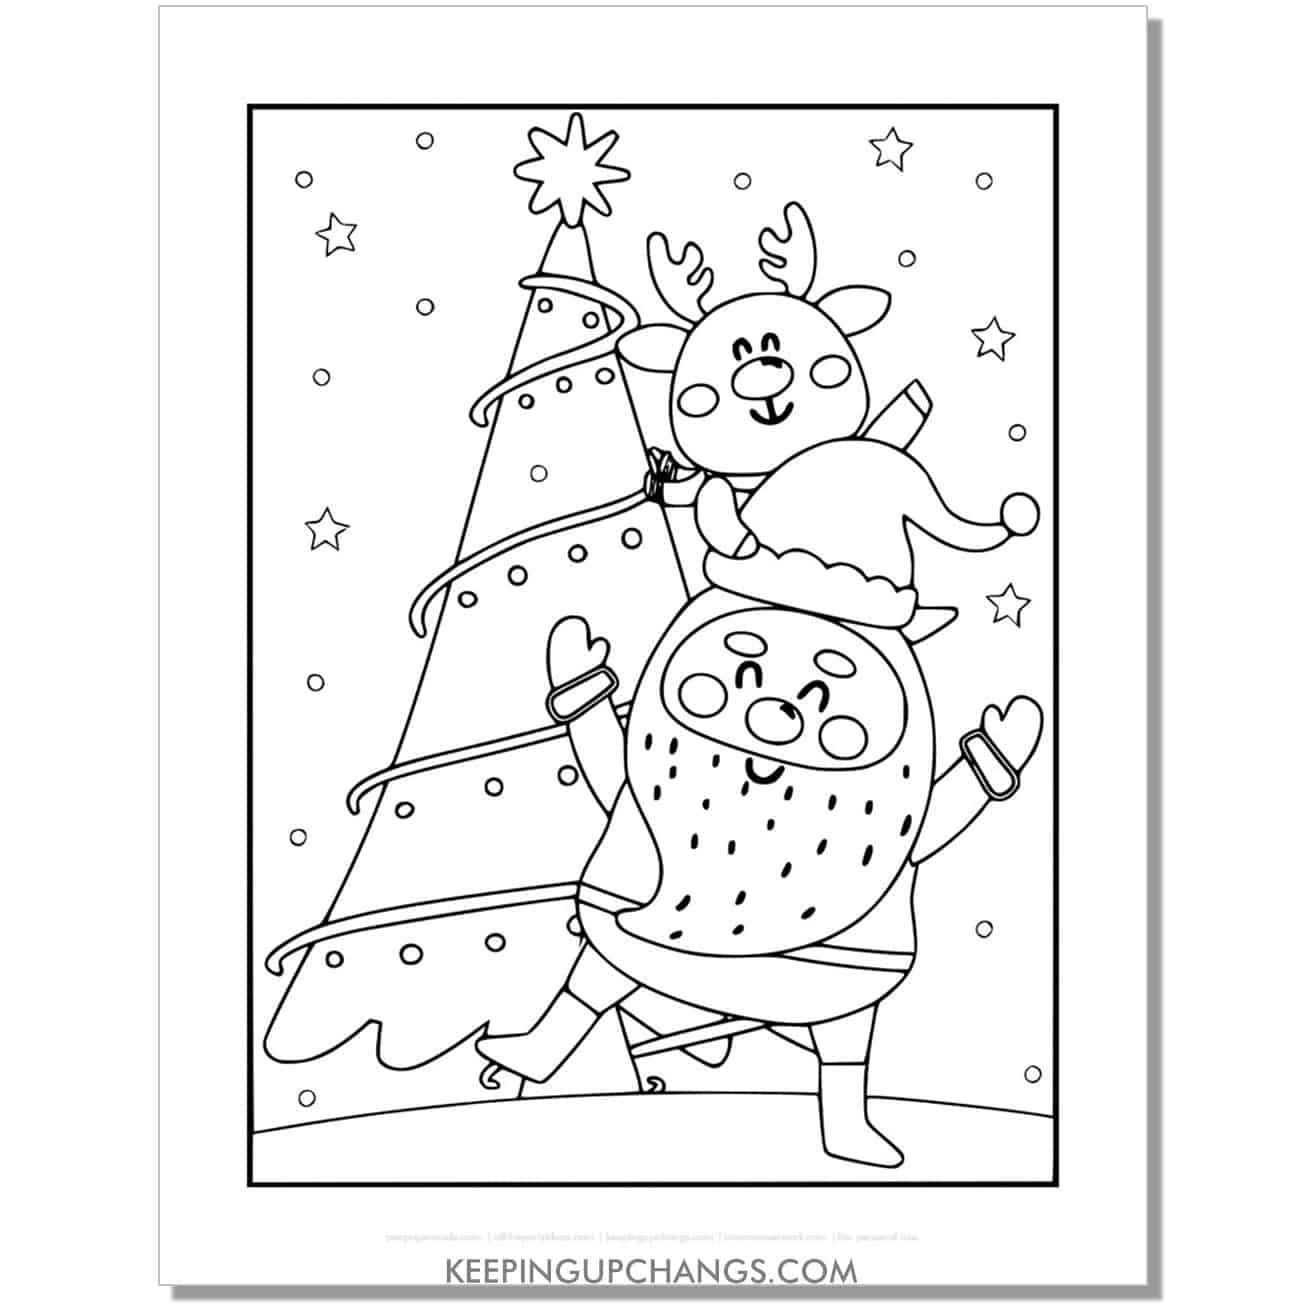 free full size santa with reindeer on head coloring page.